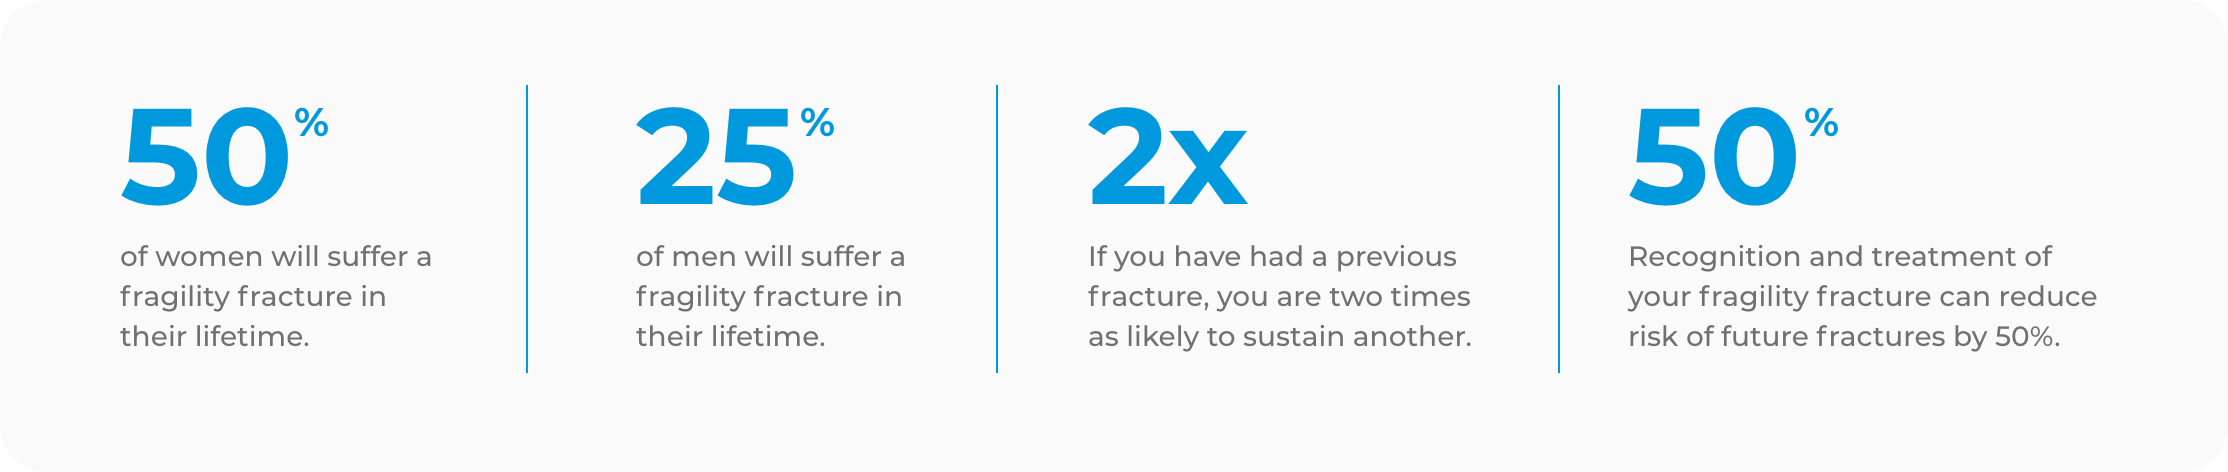 50% of women will suffer a fragility fracture in their lifetime. 25% of men will suffer a fragility fracture in their lifetime. If you have had a previous fracture, you are 2 times as likely to sustain another. Recognition and treatment of your fragility fracture can reduce risk of future fractures by 50%.